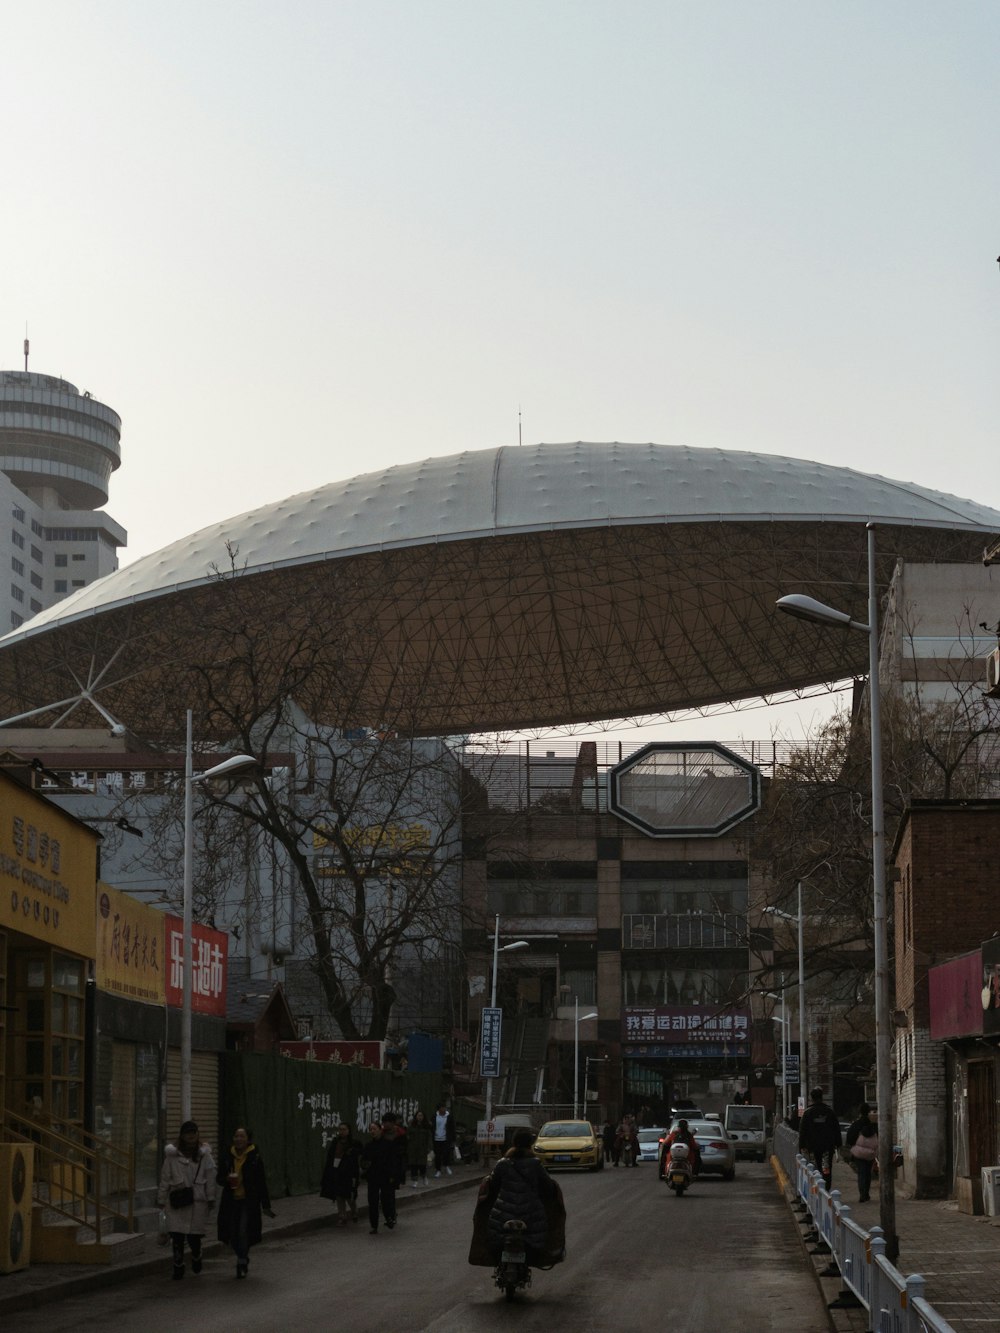 a large dome shaped building